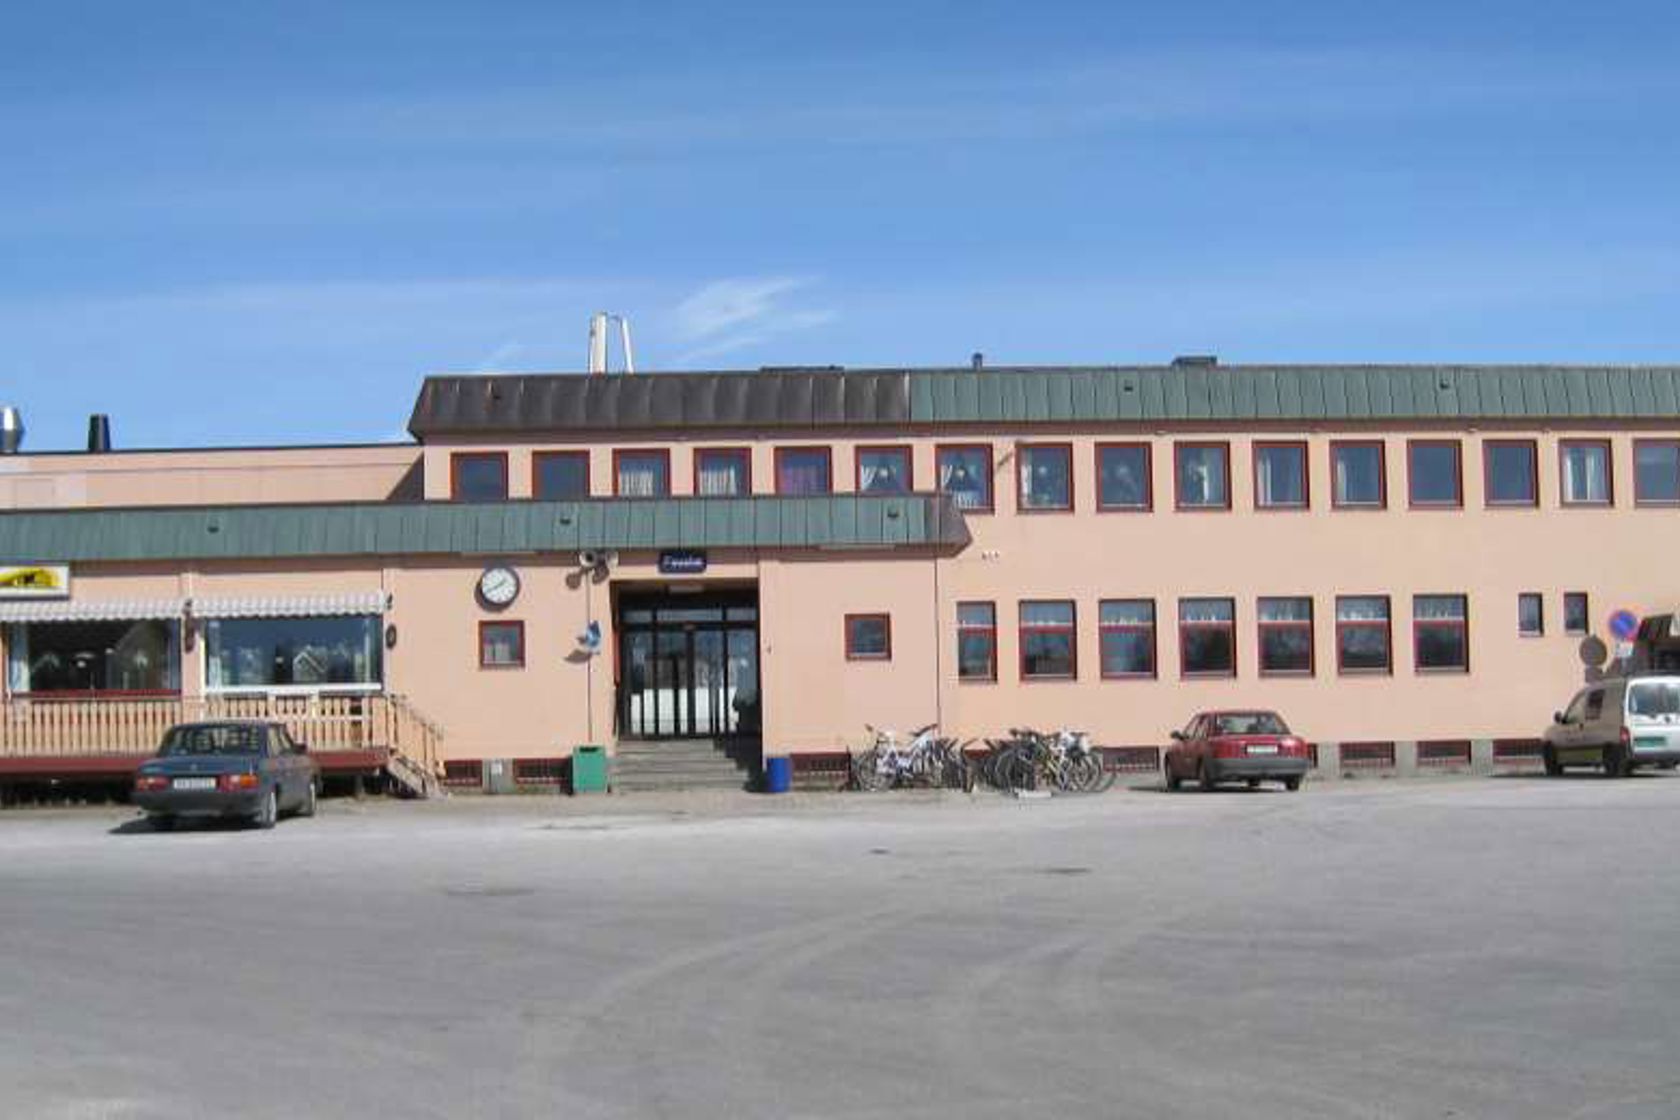 Exterior view of Fauske station